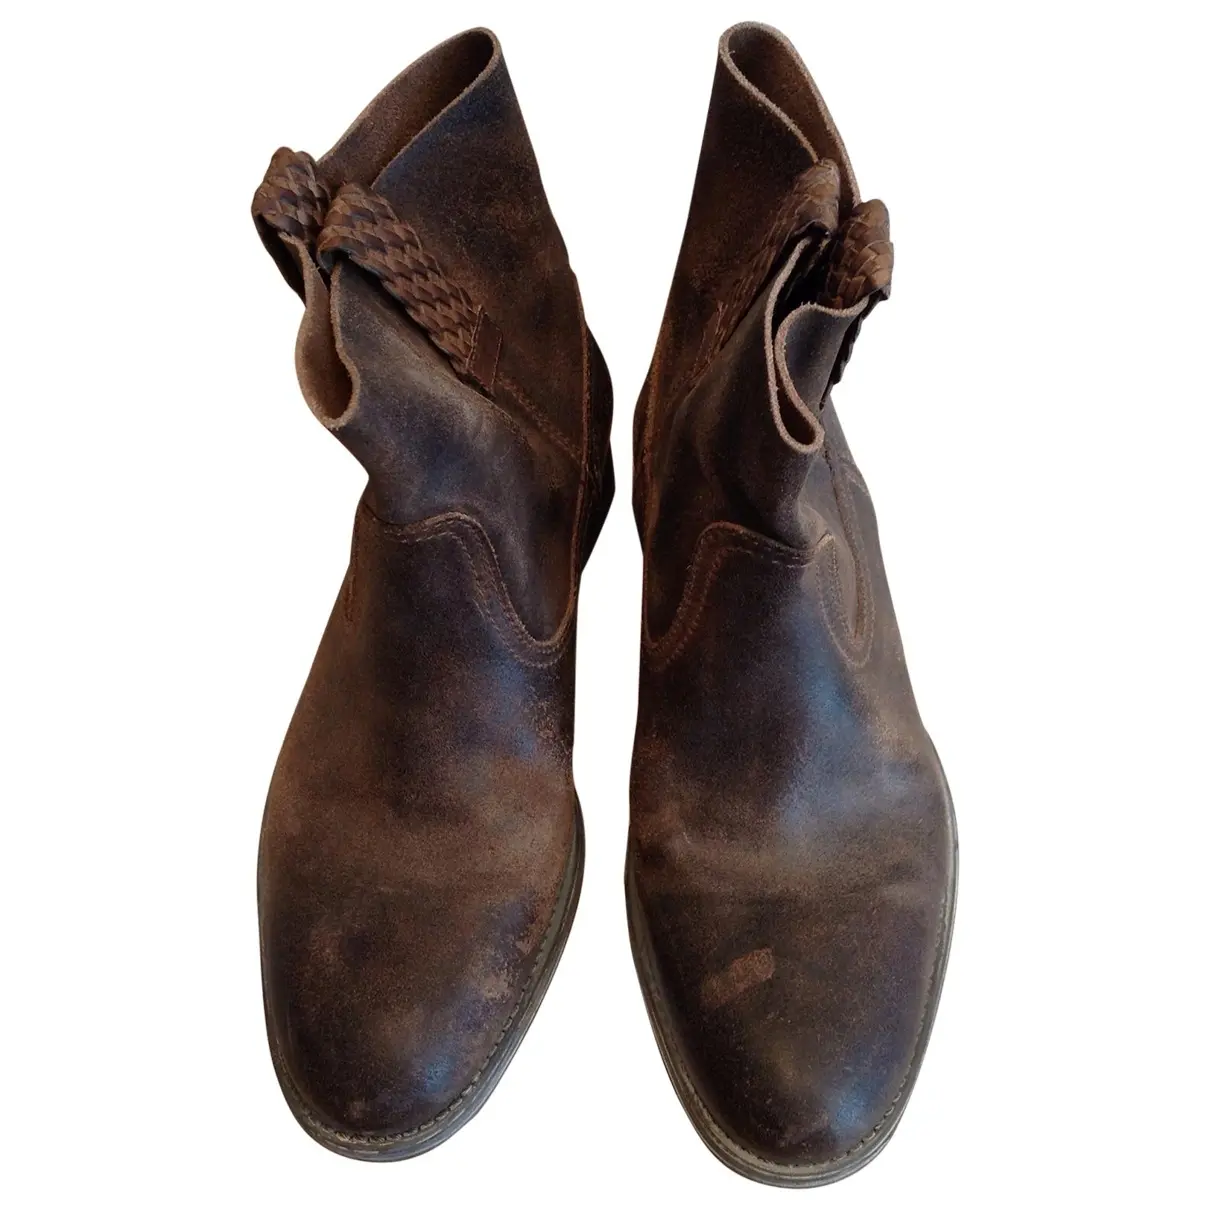 Brown Suede Ankle boots N.D.C. Made by Hand